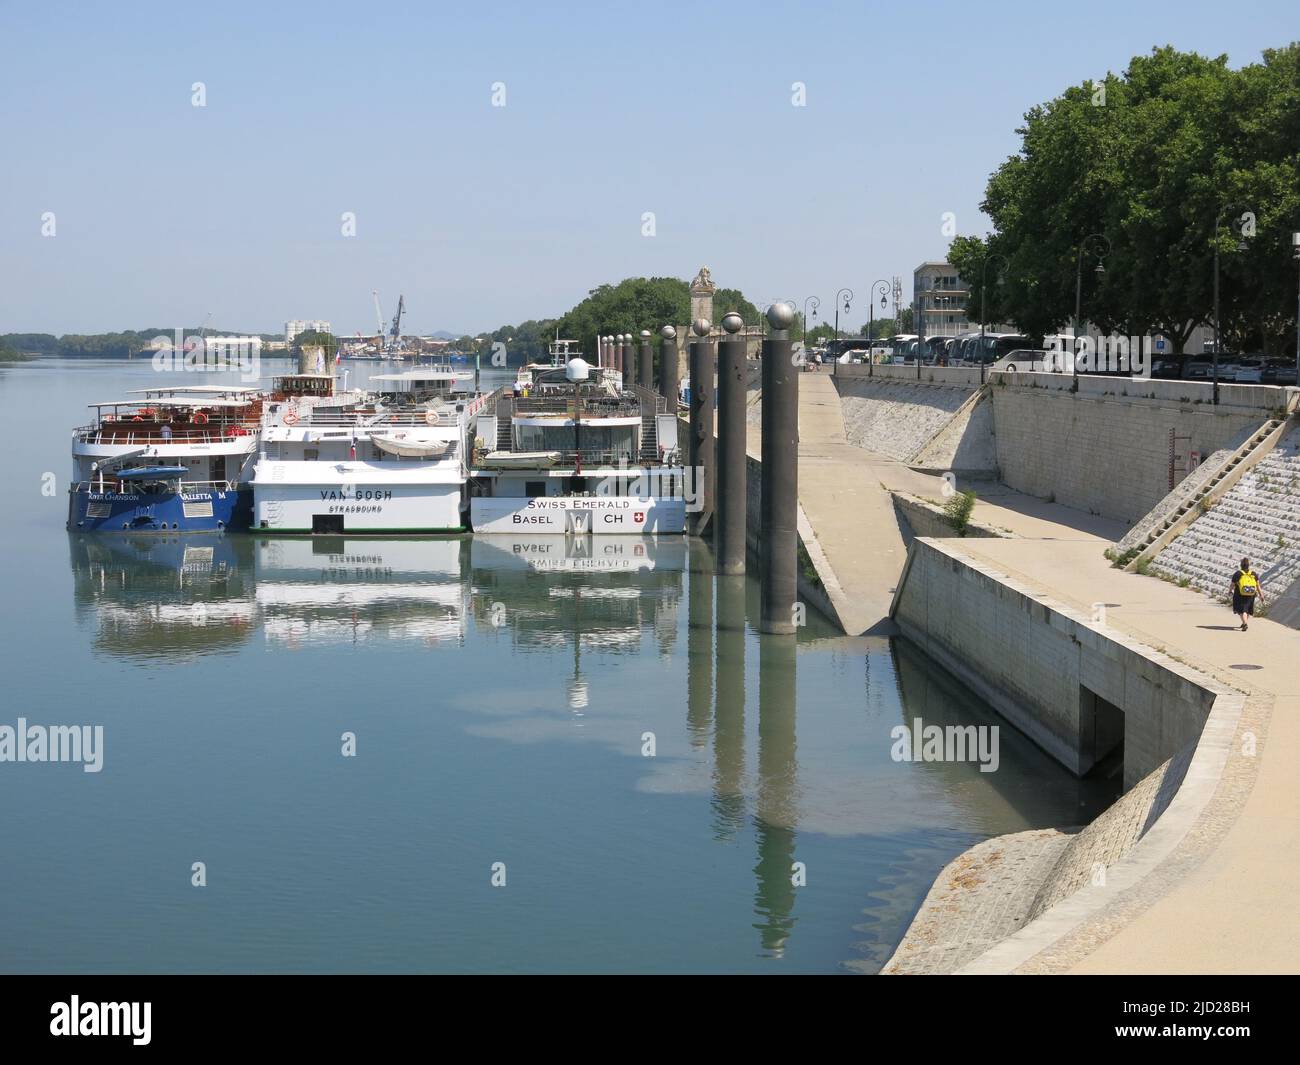 It is common practice on river cruises to moor three boats alongside each other and passengers must disembark across all three to reach the shore. Stock Photo